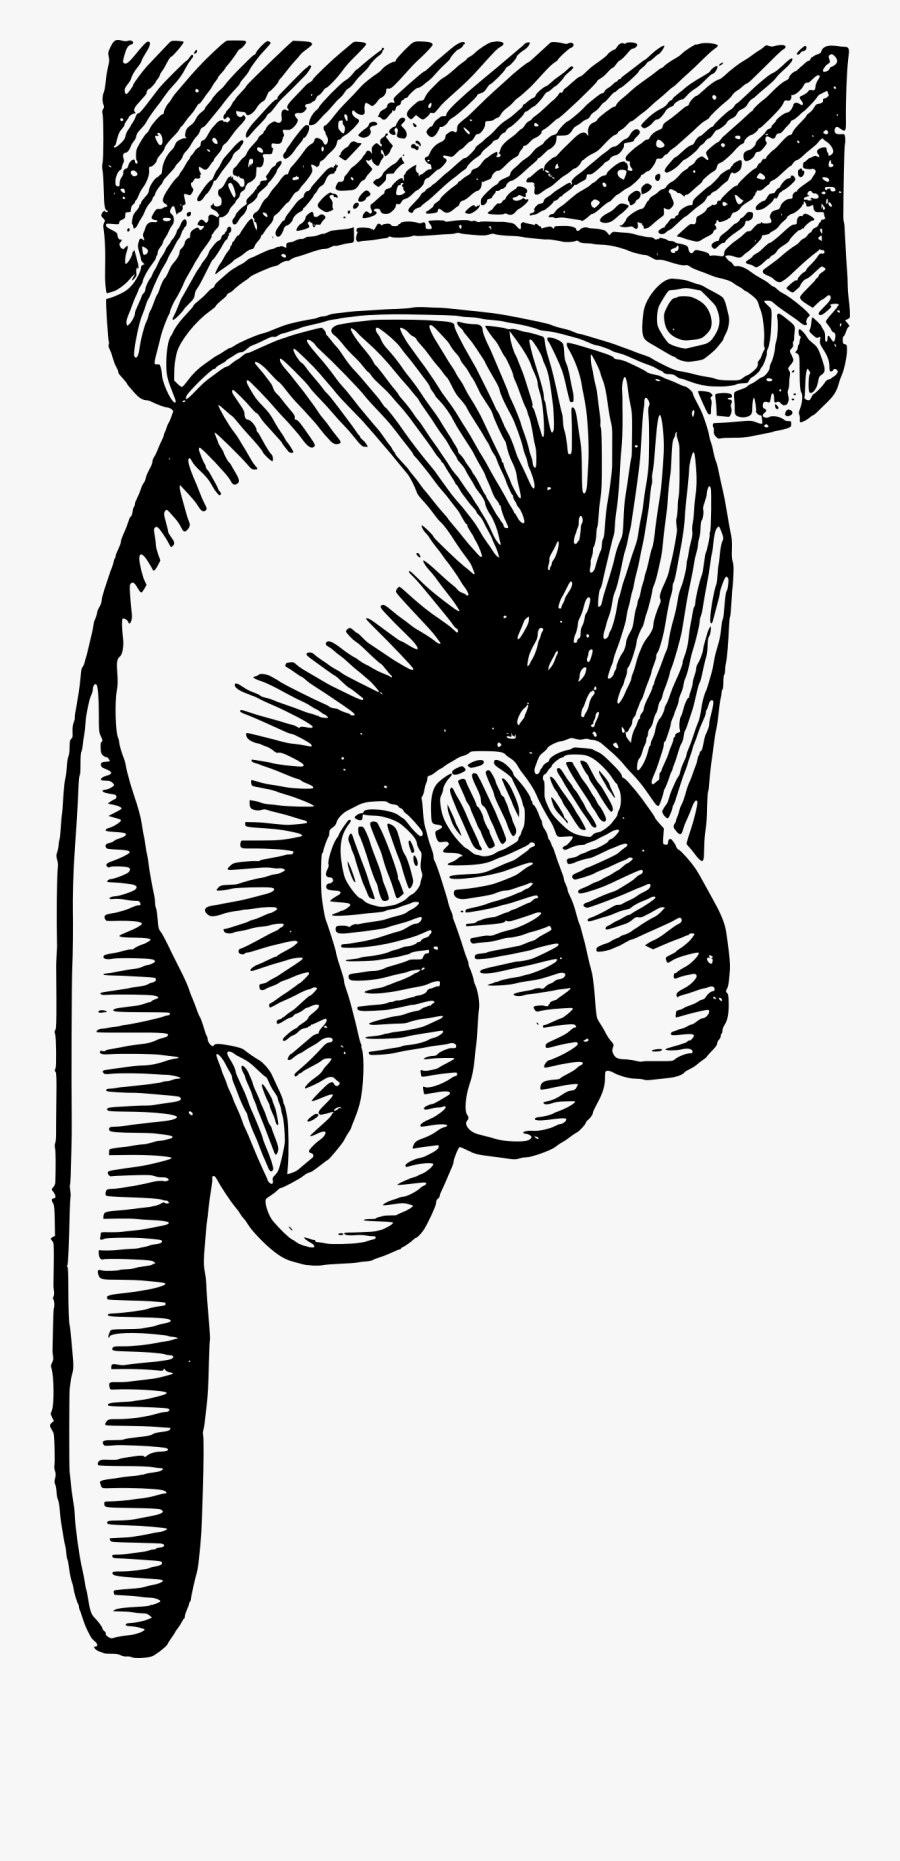 Finger Pointing Down Clipart, Transparent Clipart